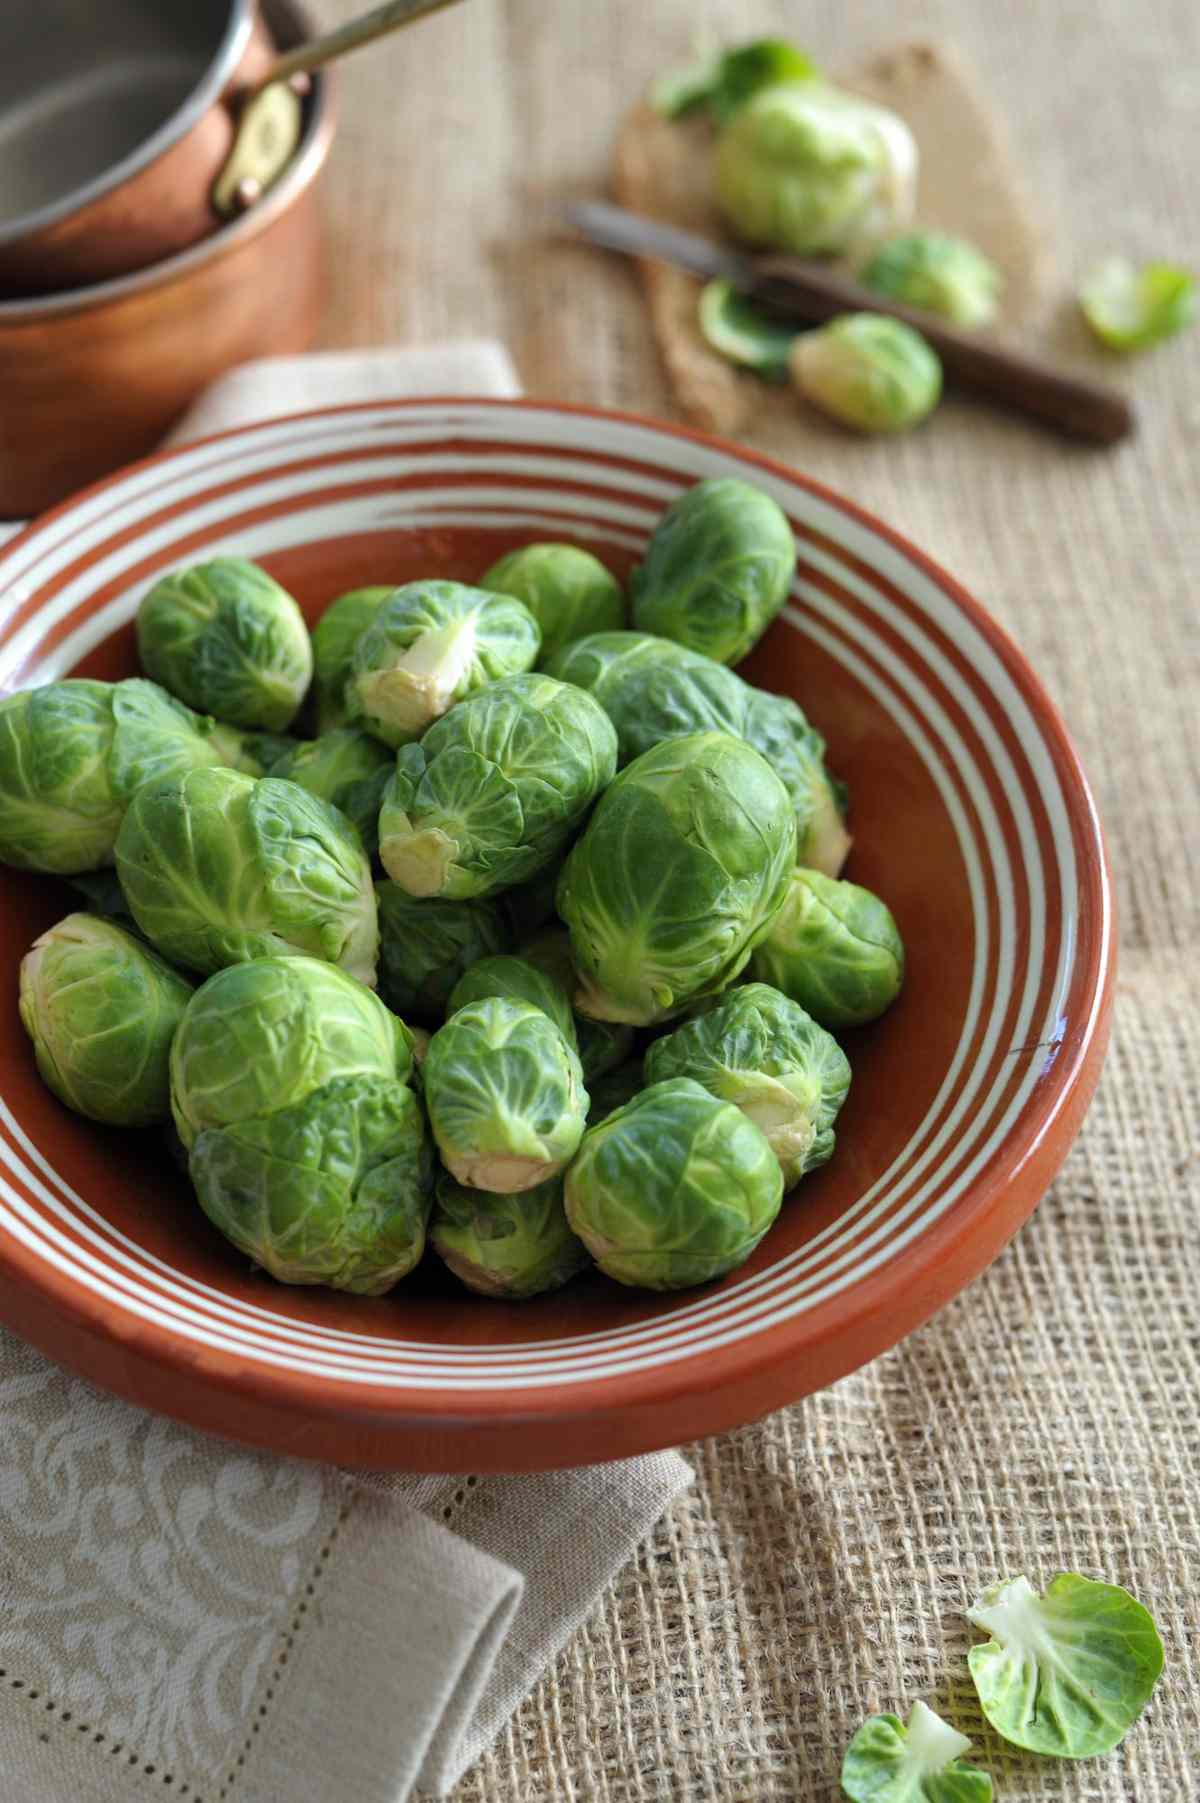 10 of 13 Brussels sprouts